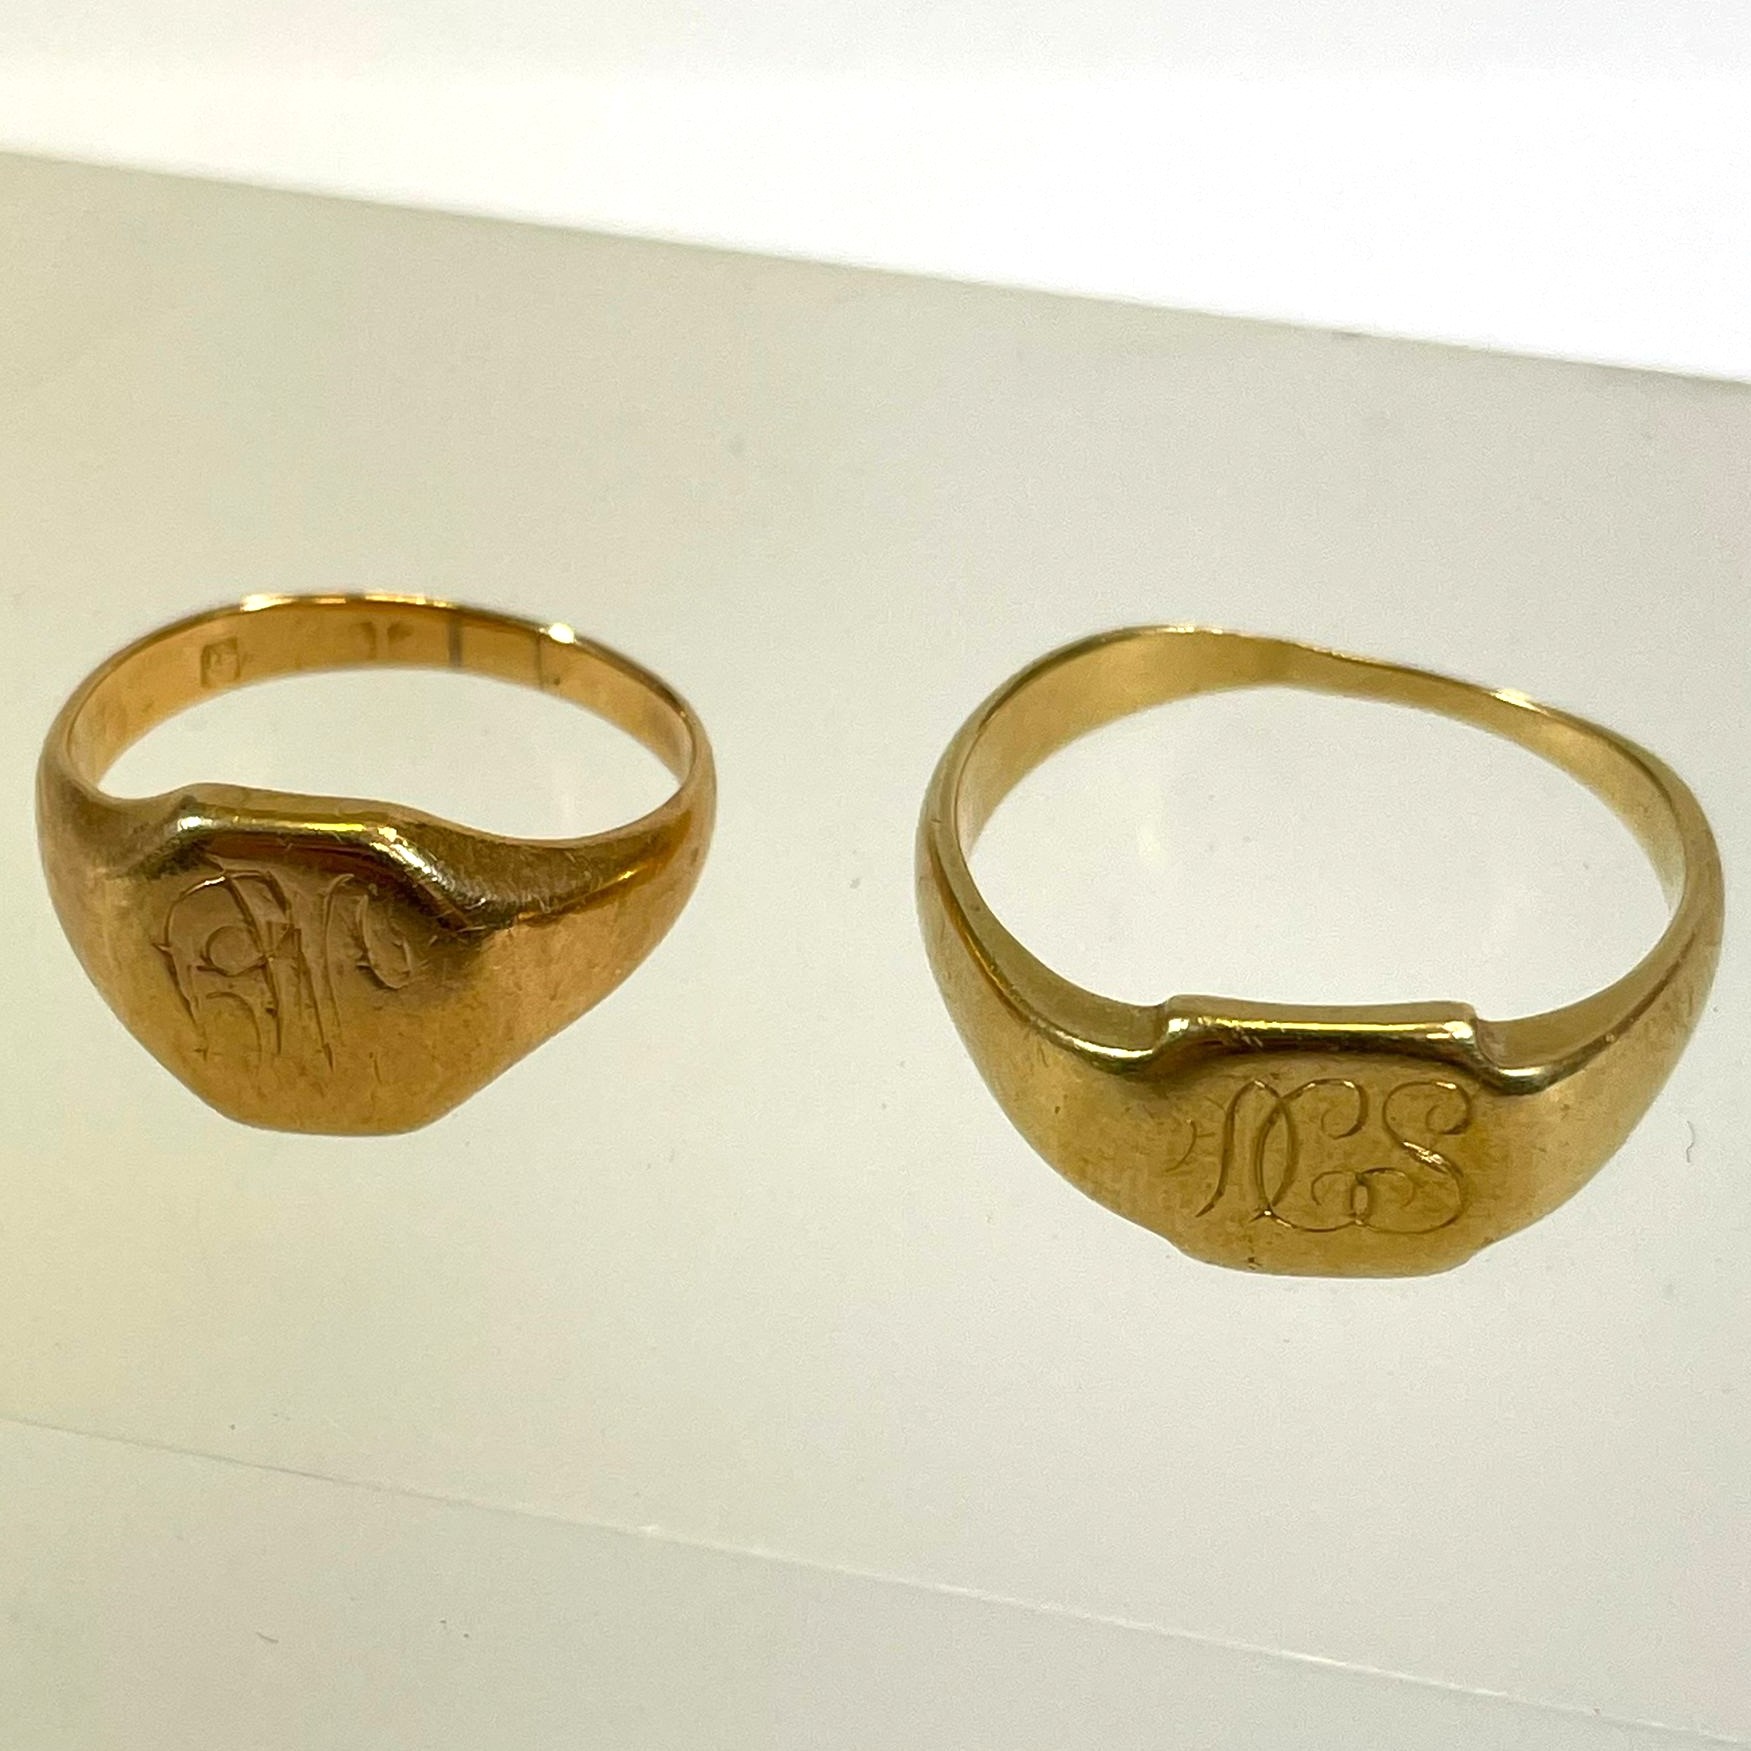 Two 18ct yellow gold signet rings. Sizes M and T. Approximate total weight 13.3 grams. Wear and